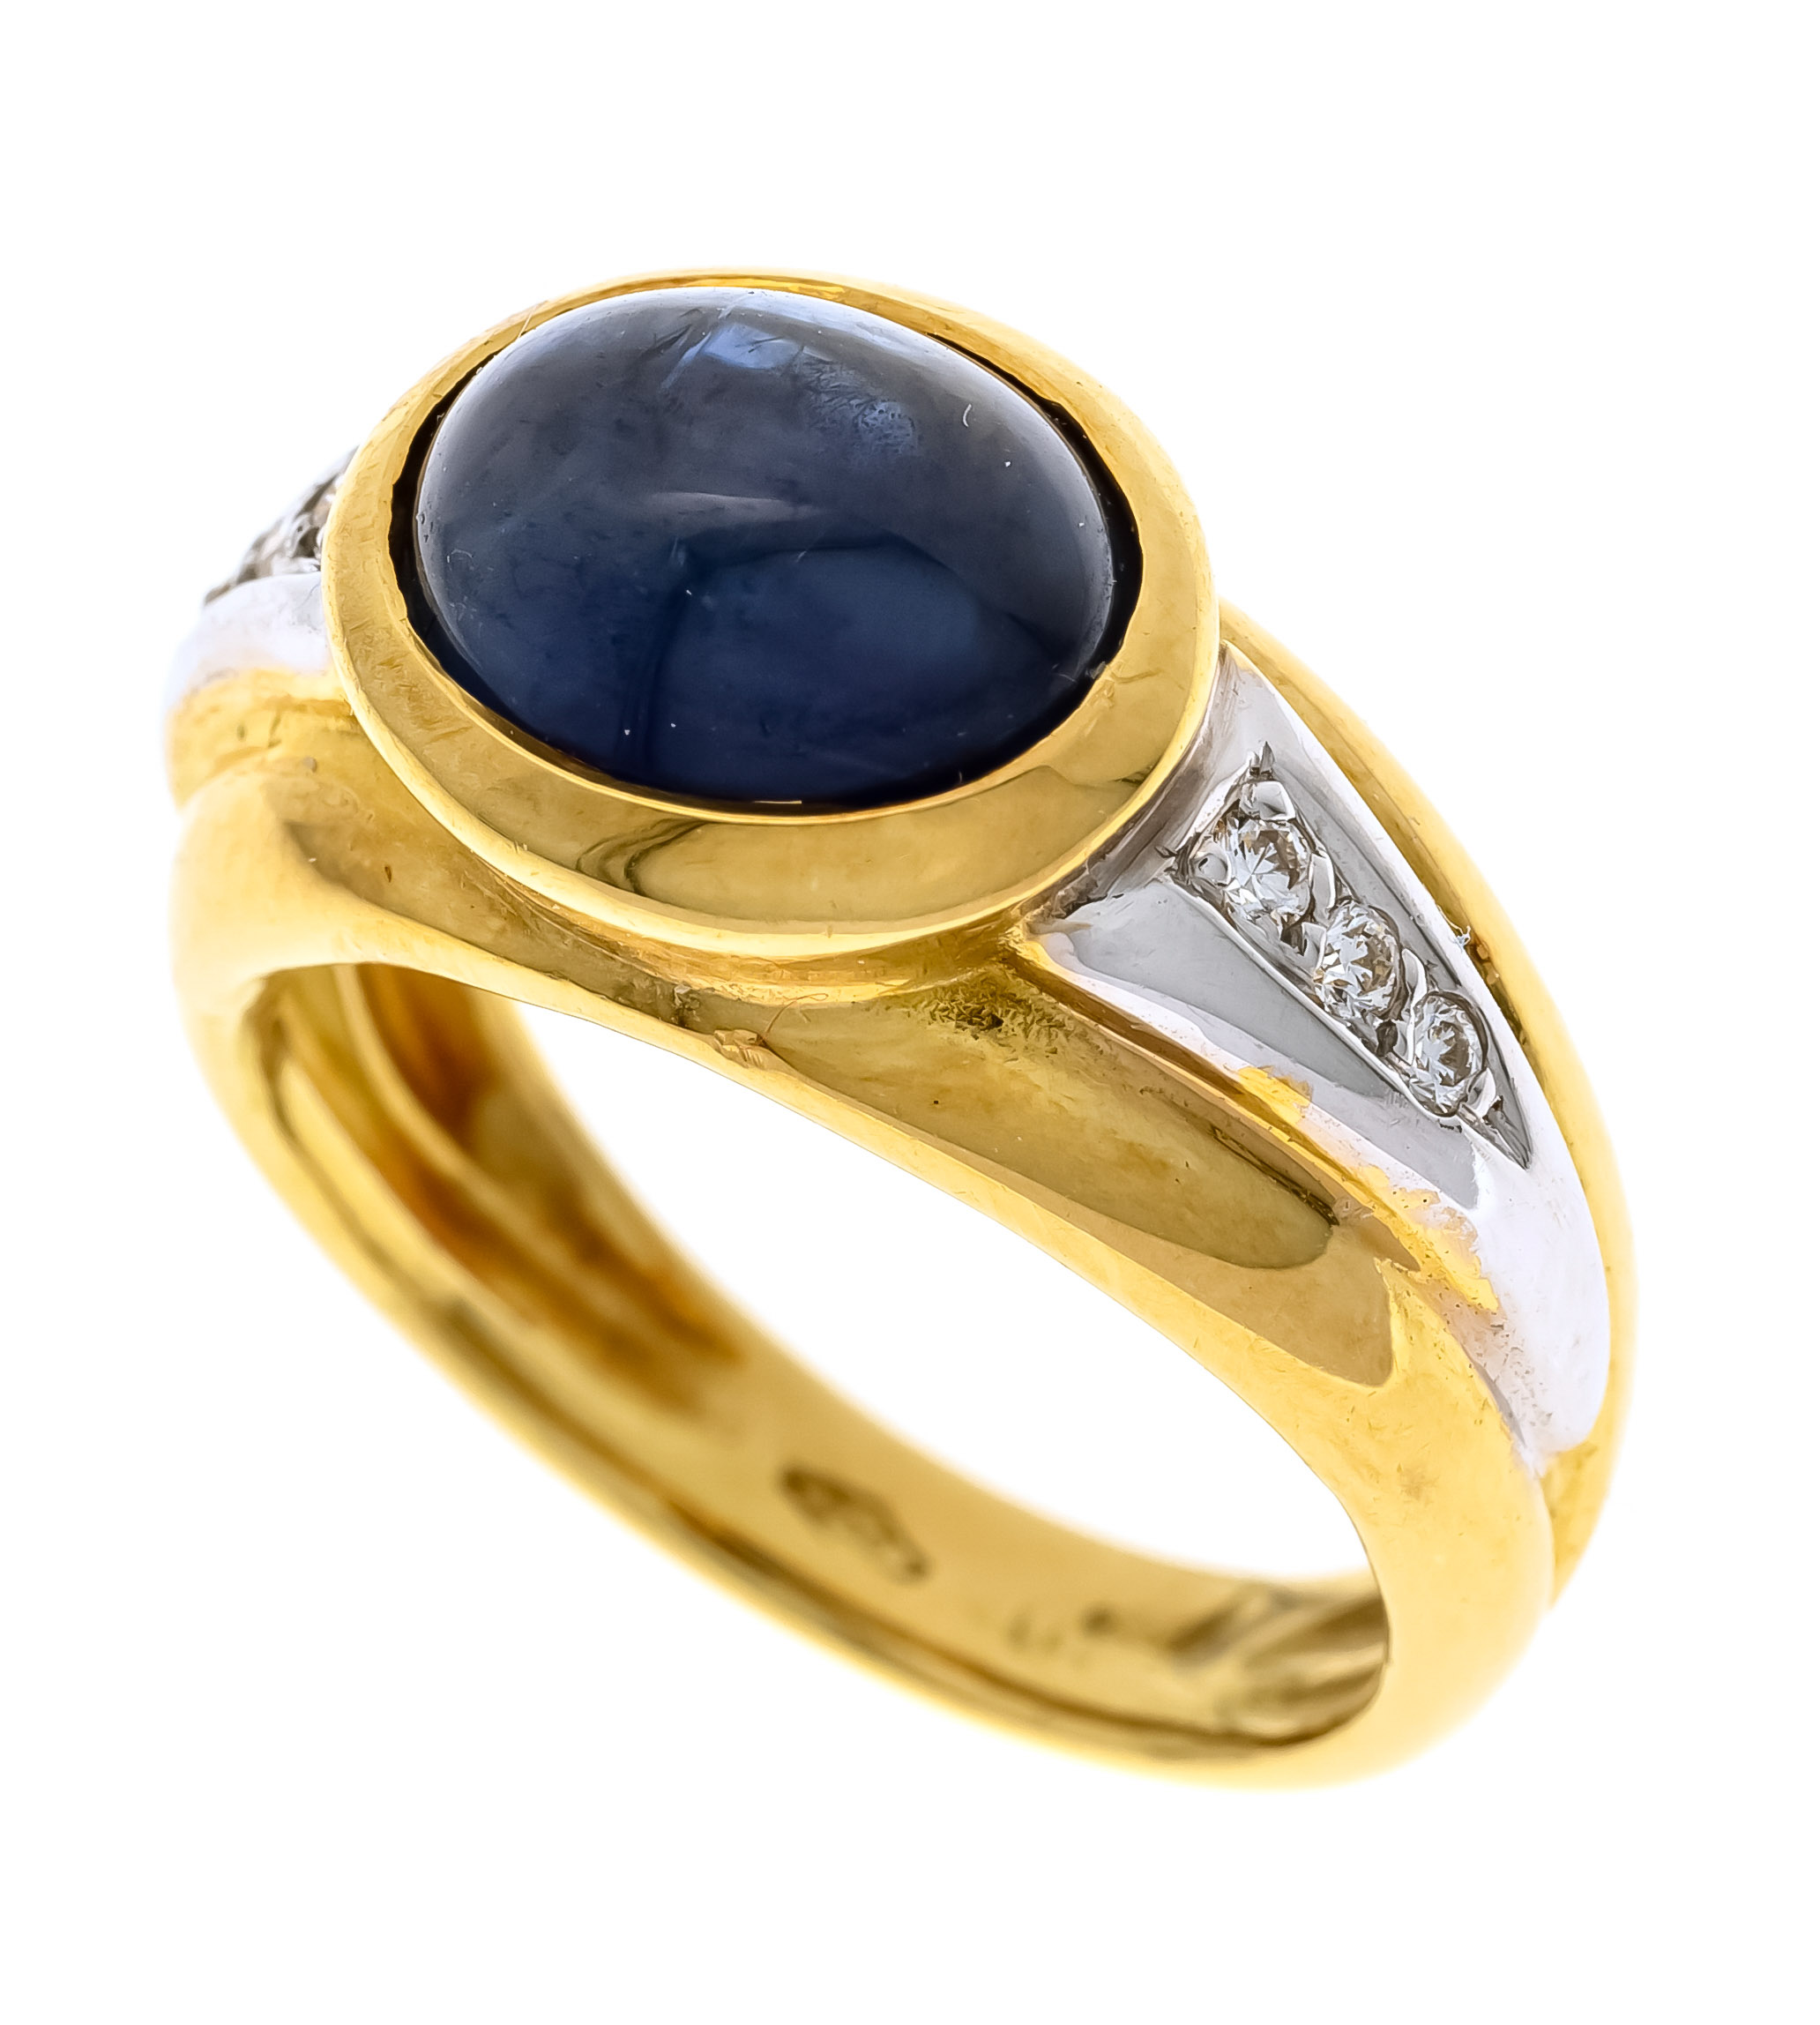 Sapphire-cut diamond ring GG/WG 750/000 with an oval sapphire cabochon 4.10 ct darker blue,